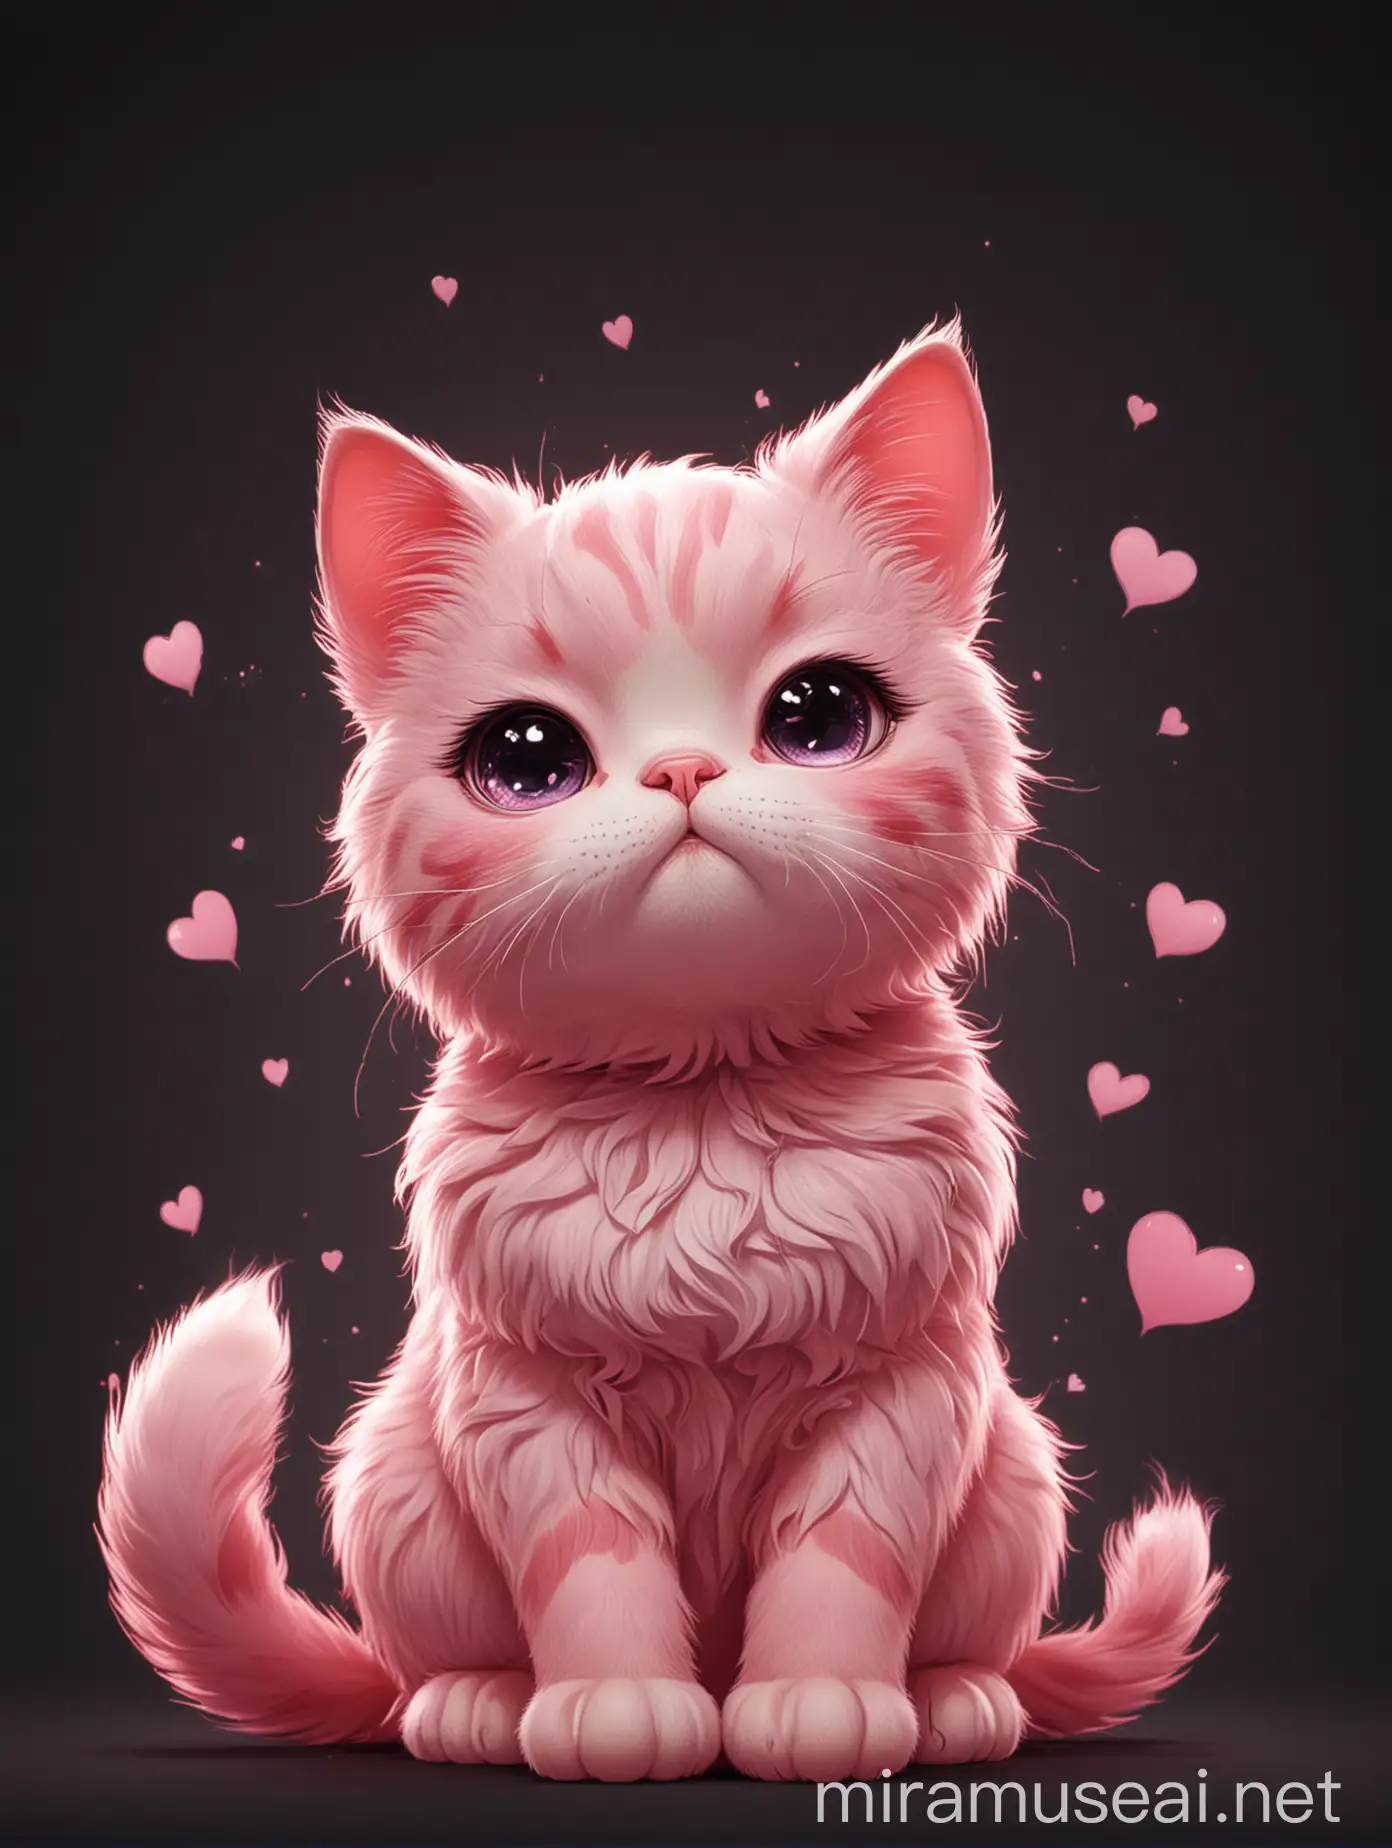 Adorable Pink Cat NFT Illustration in Enigmatic Darkness